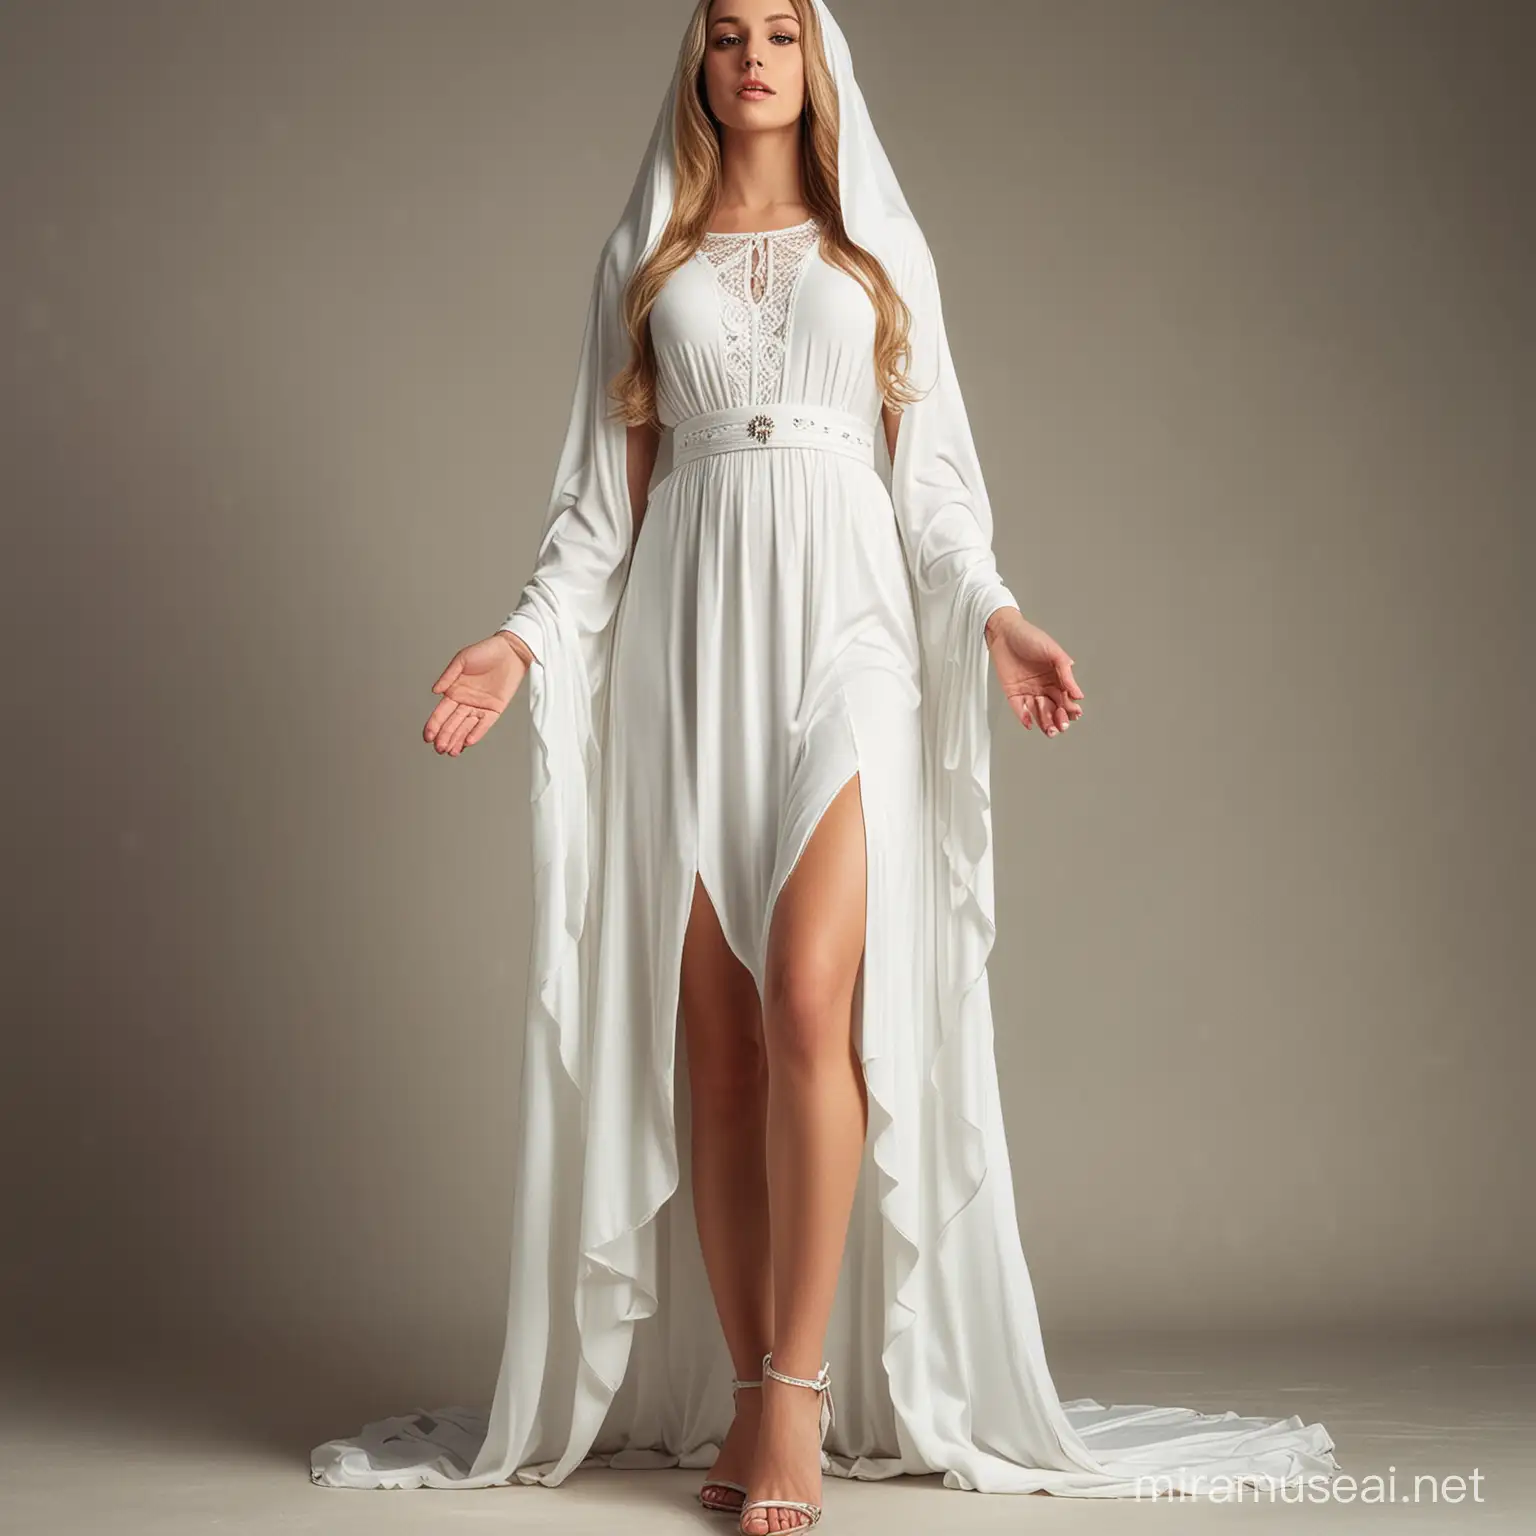 Beautiful virgin mary white dress and thigh showing